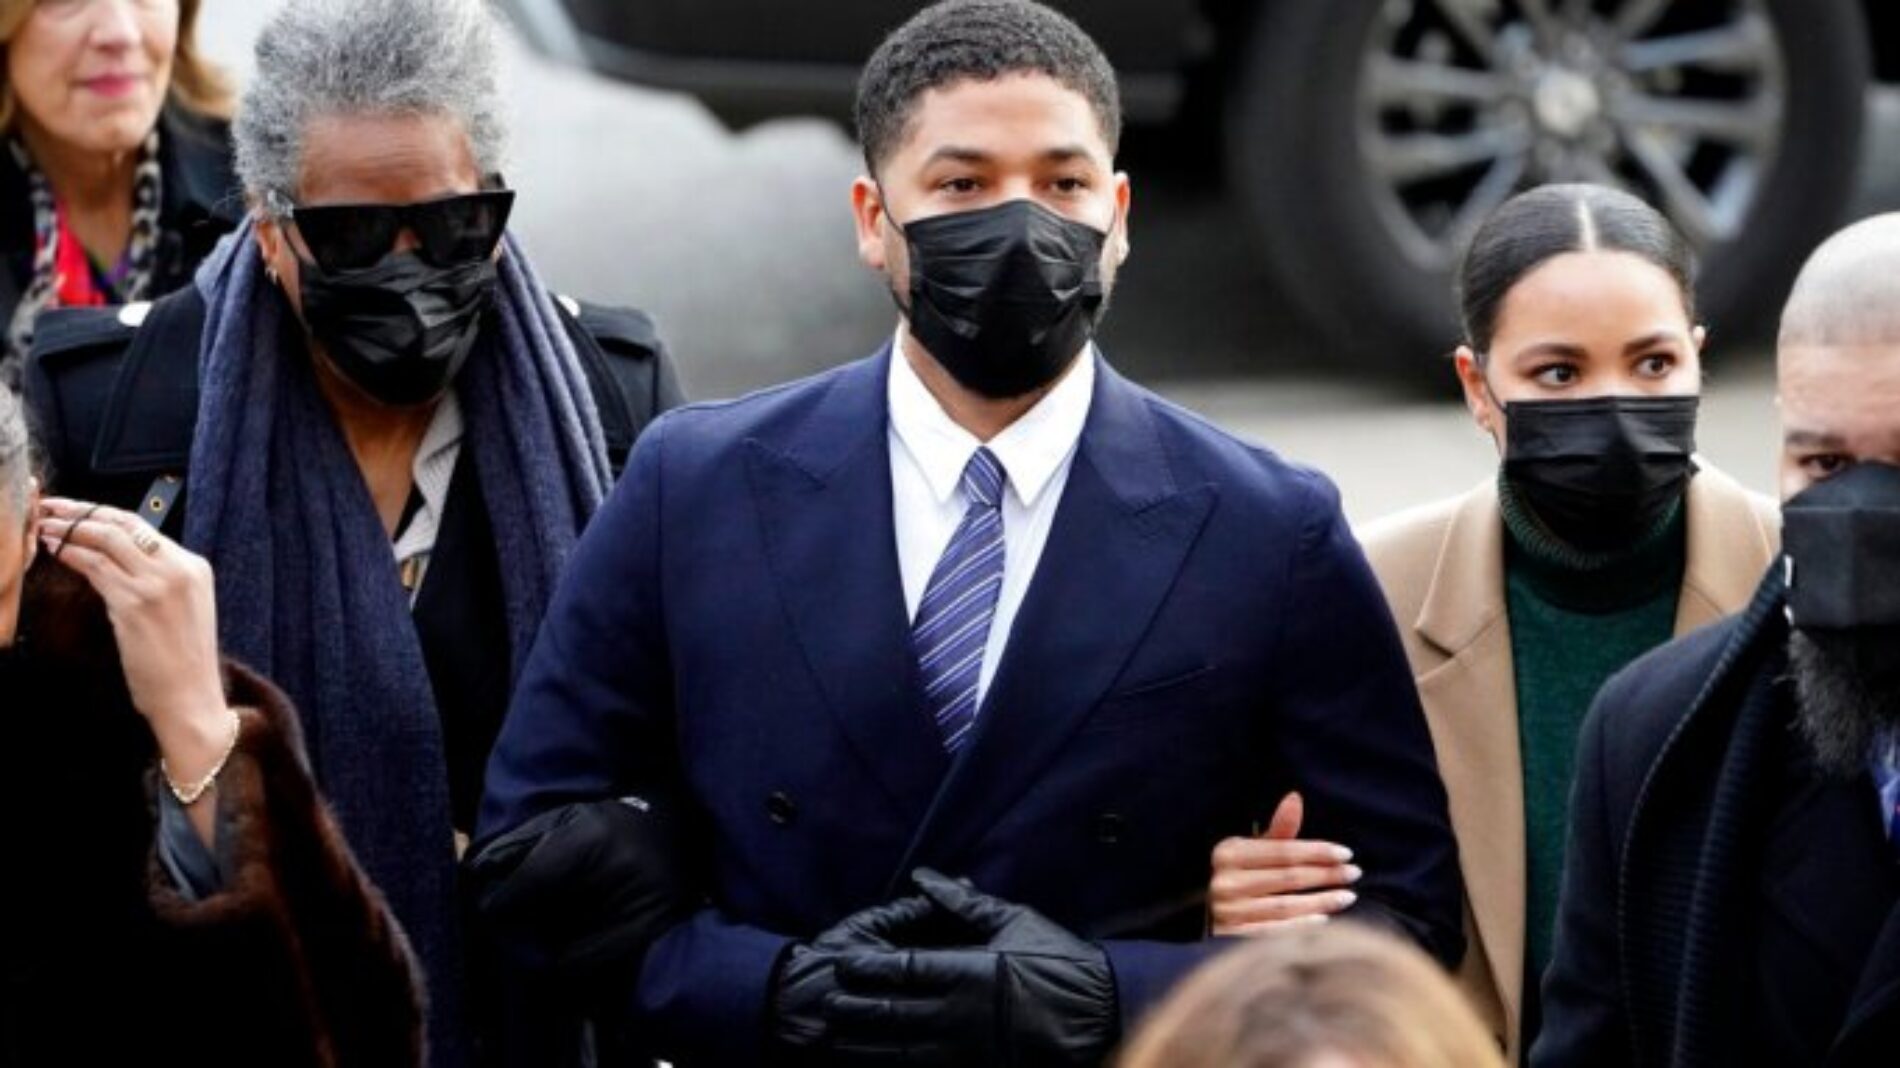 Jussie Smollett’s Case Goes To Trial; Defense Calls Him “The Real Victim”; Prosecution Slams “Fake Hate Crime”